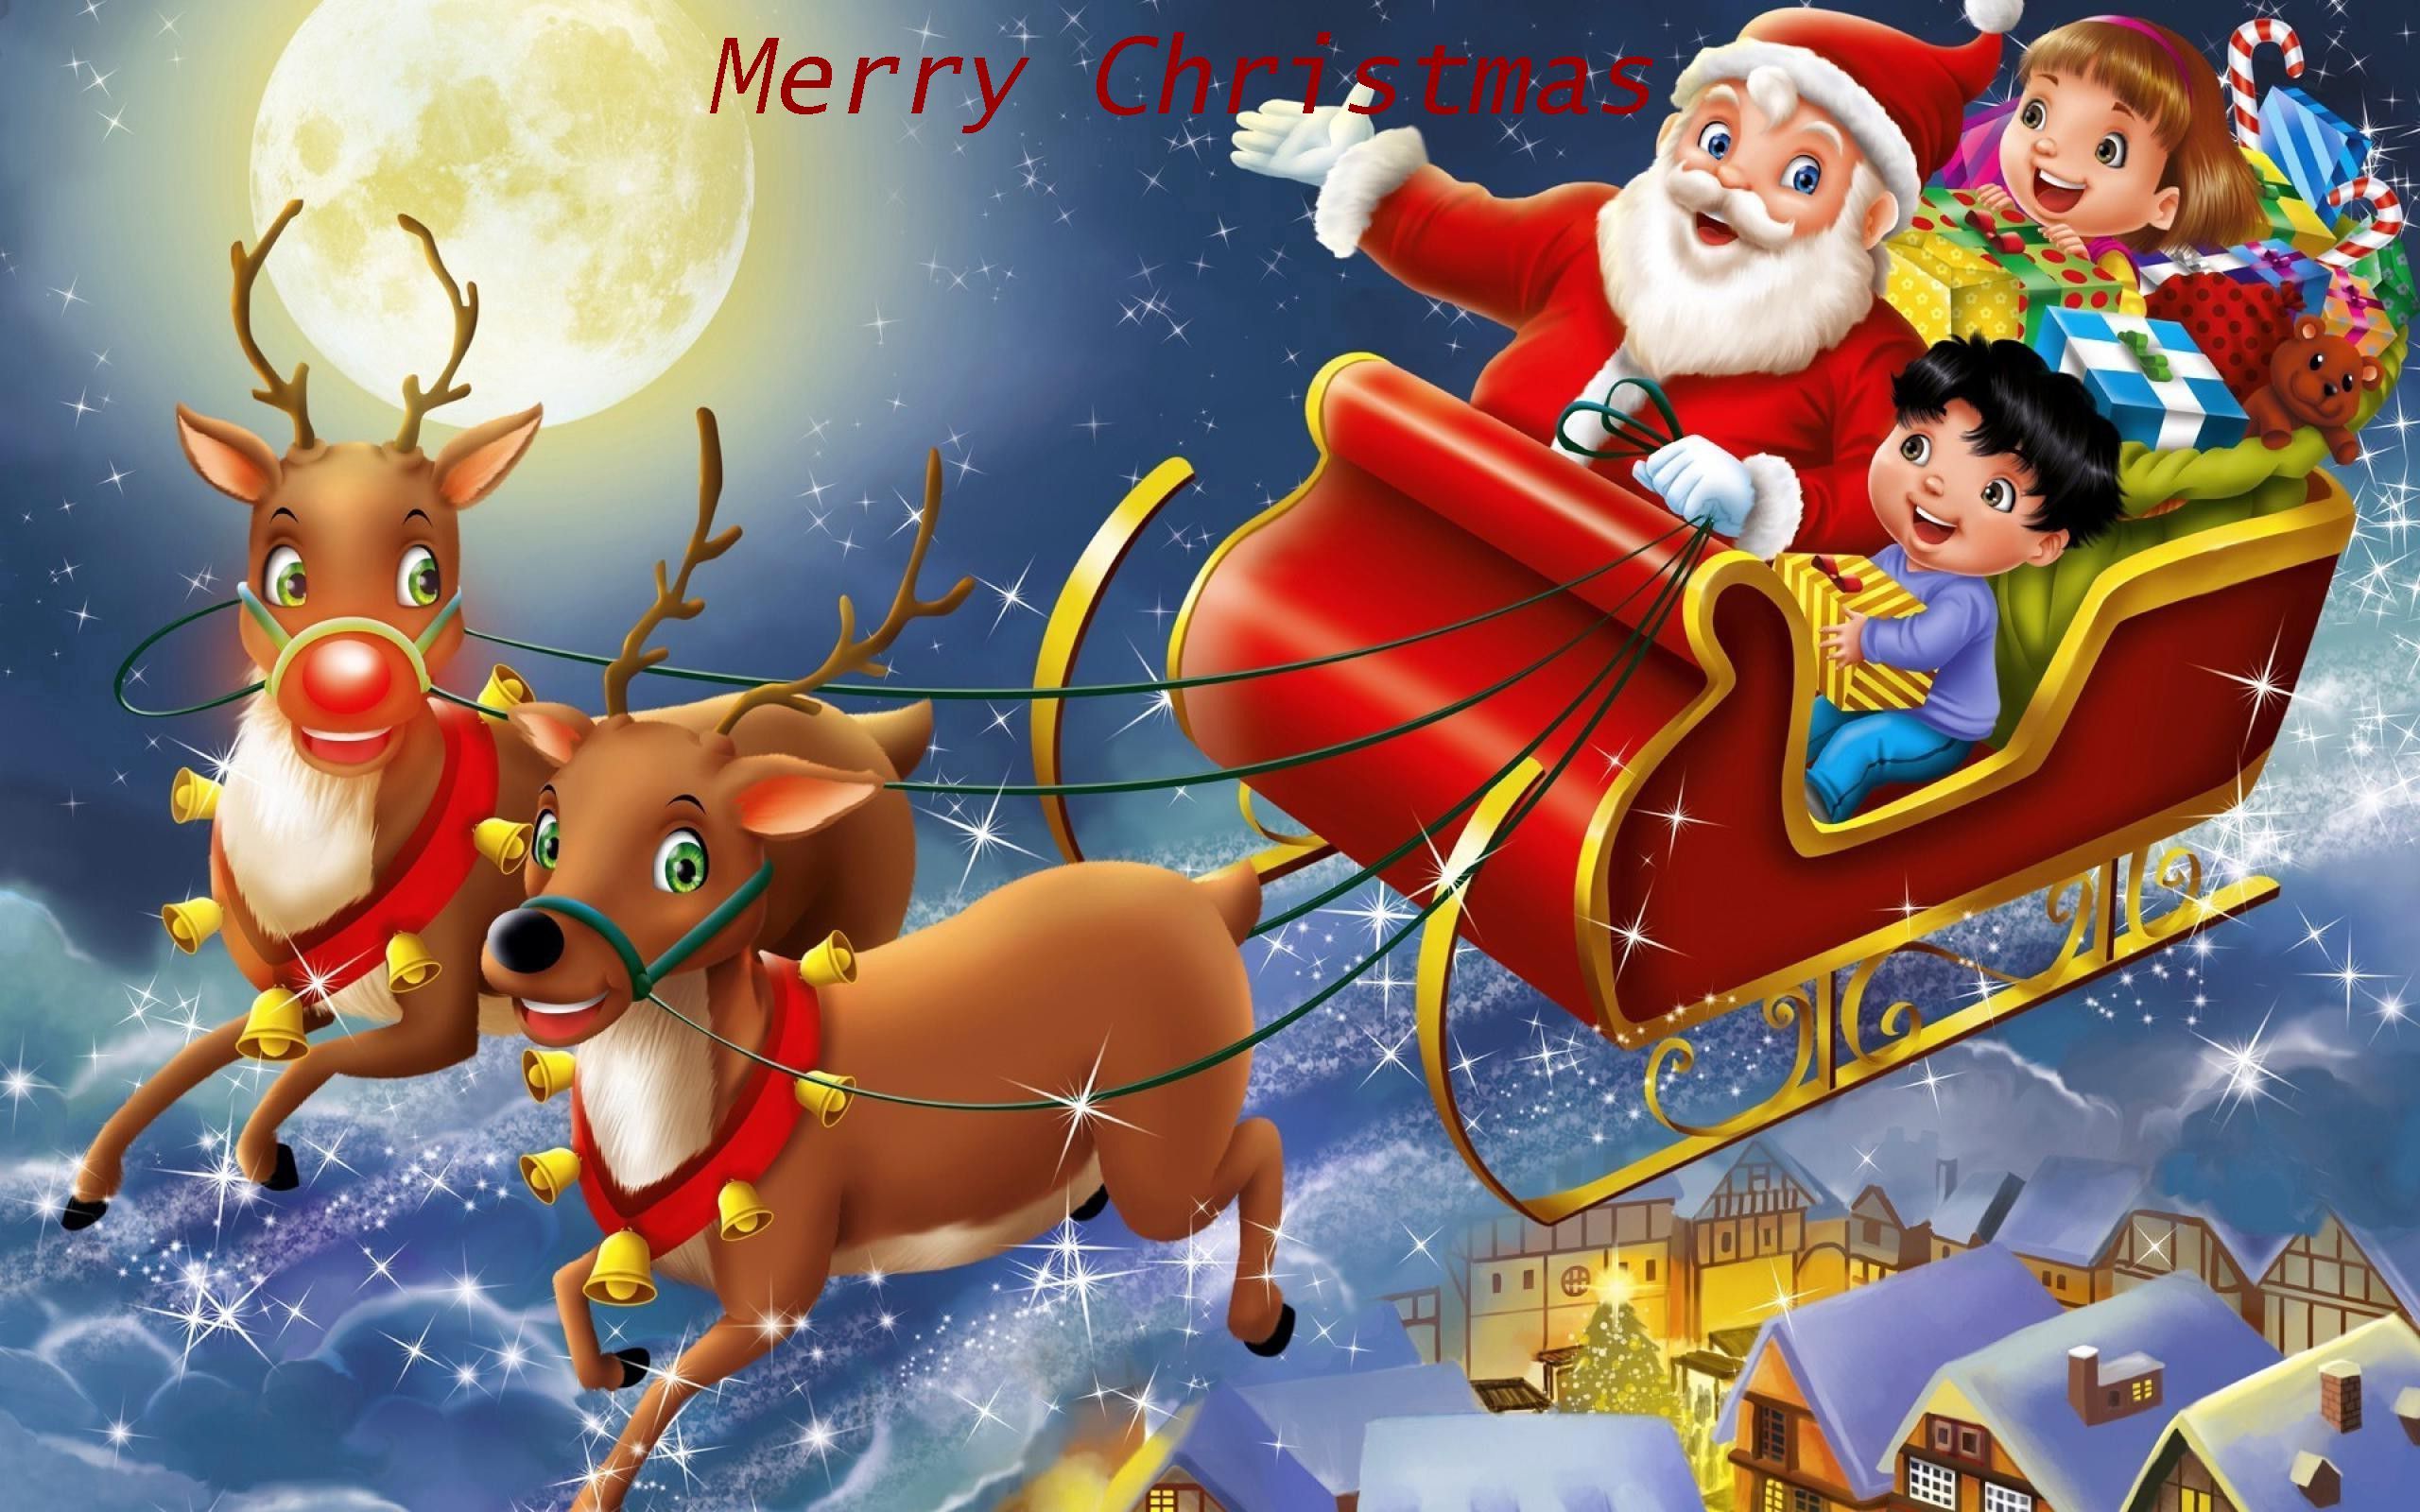 X Christmas Tree Santa Claus Powerpoint HD Wallpaper. Merry christmas picture, Christmas cards kids, Santa claus wallpaper